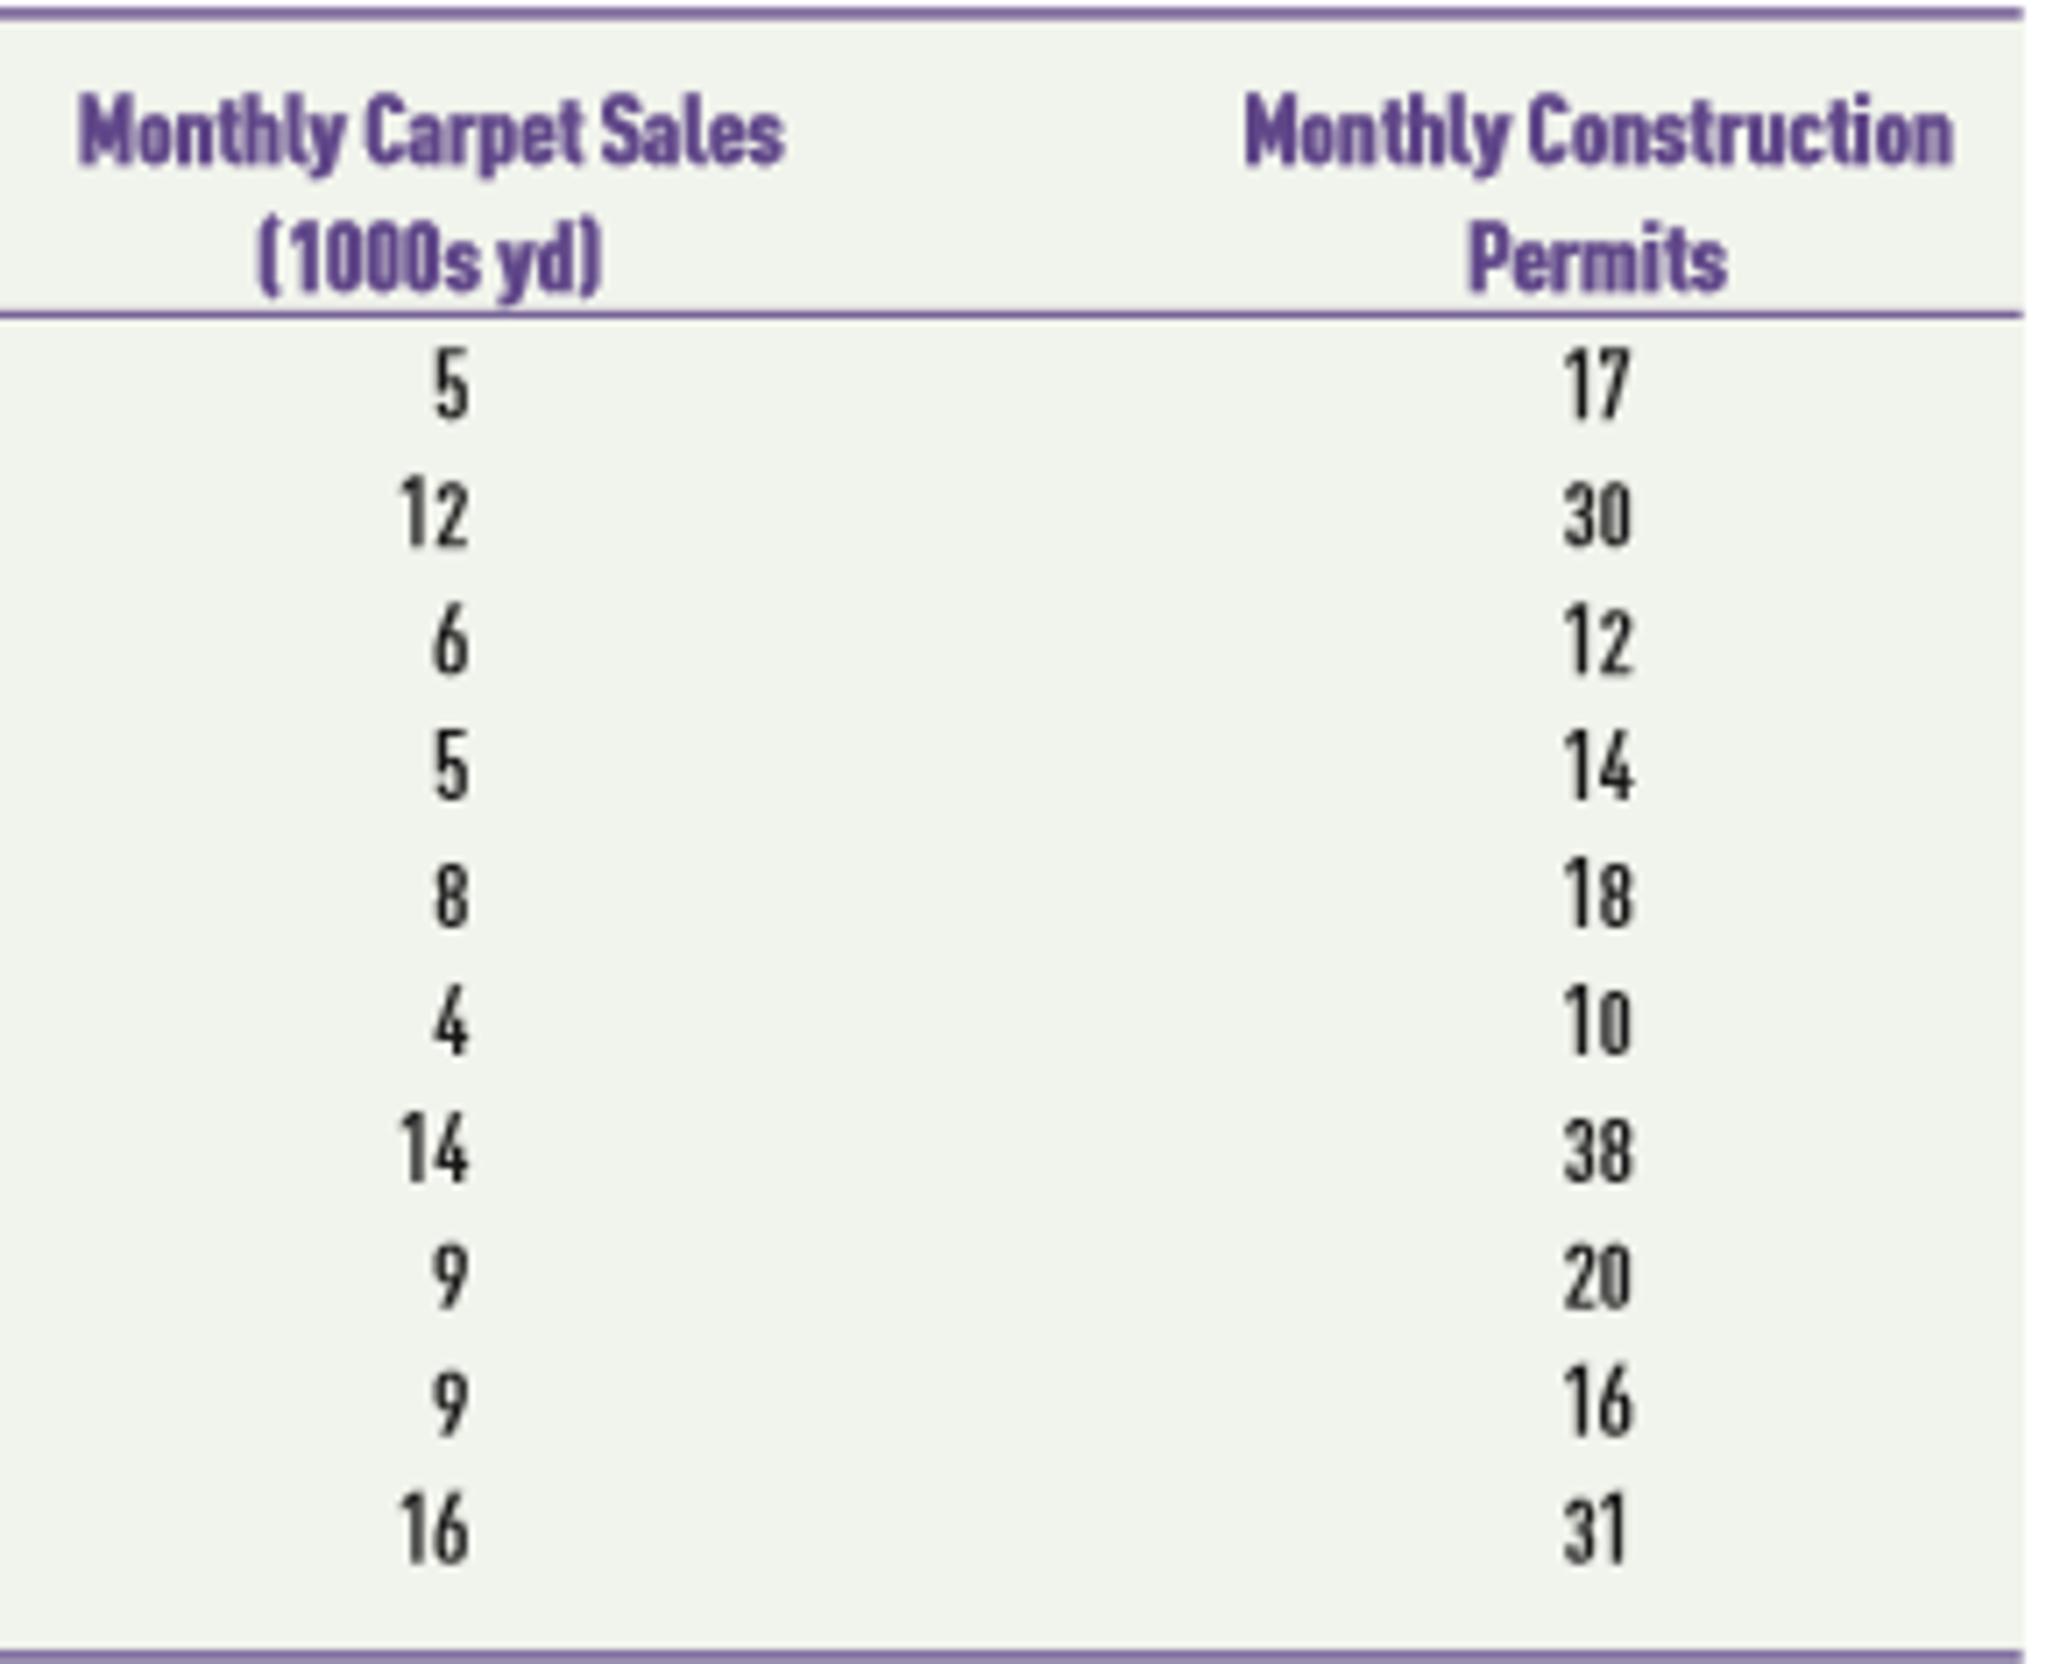 Monthly Carpet Sales (1000s yd) Monthly Construction Permits 17 30 12 14 12 38 20 16 31 16